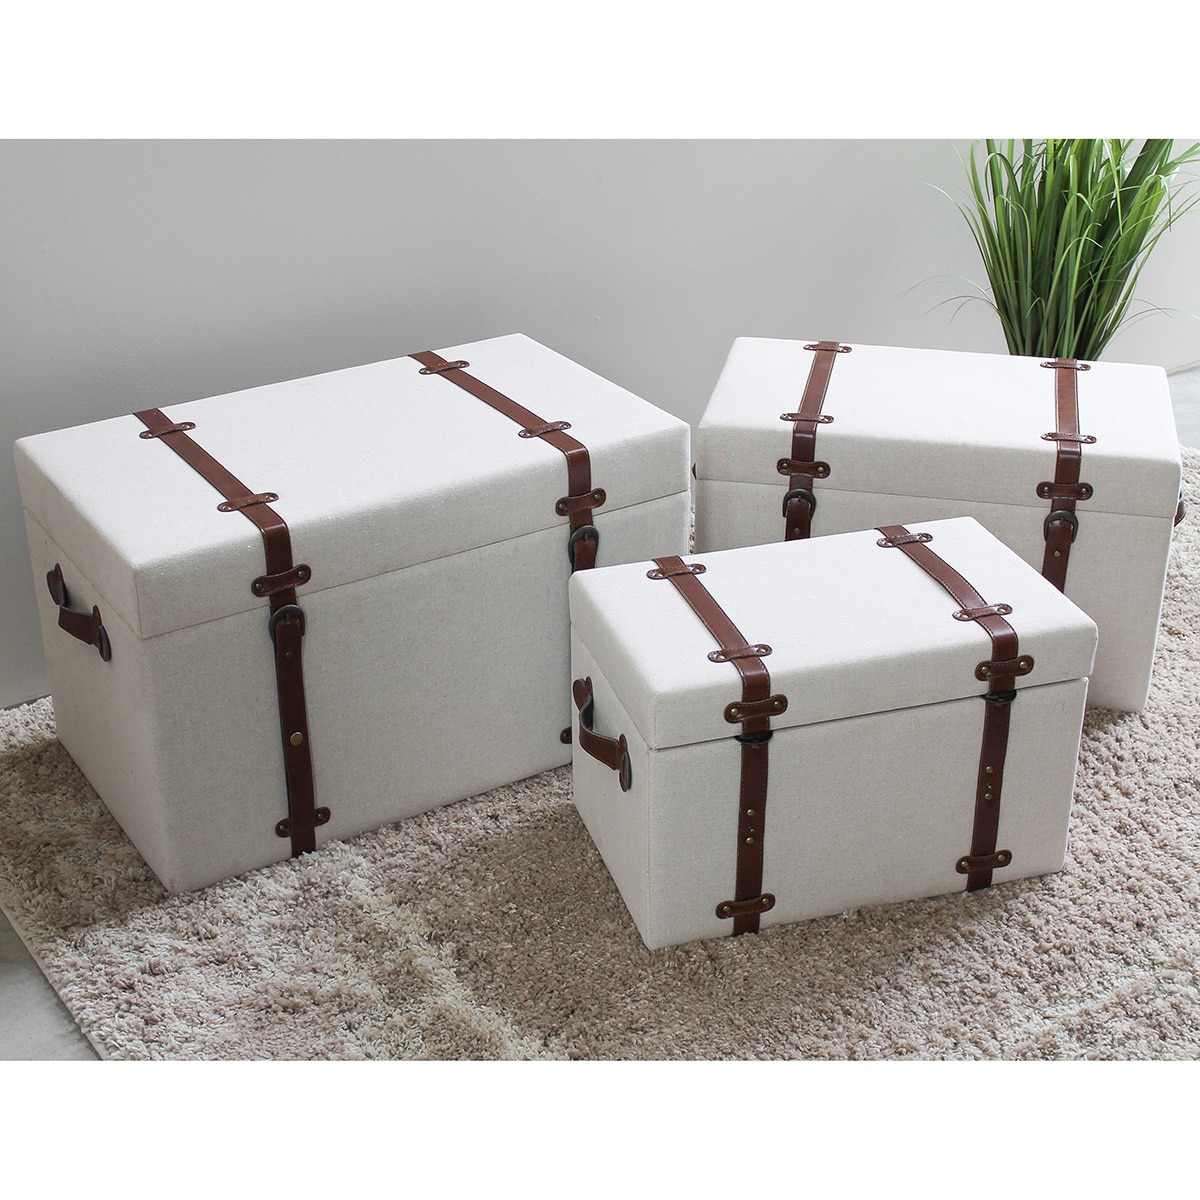 Vintage Antique Upholstered Trunks with Faux Leather Decor (Set of 3